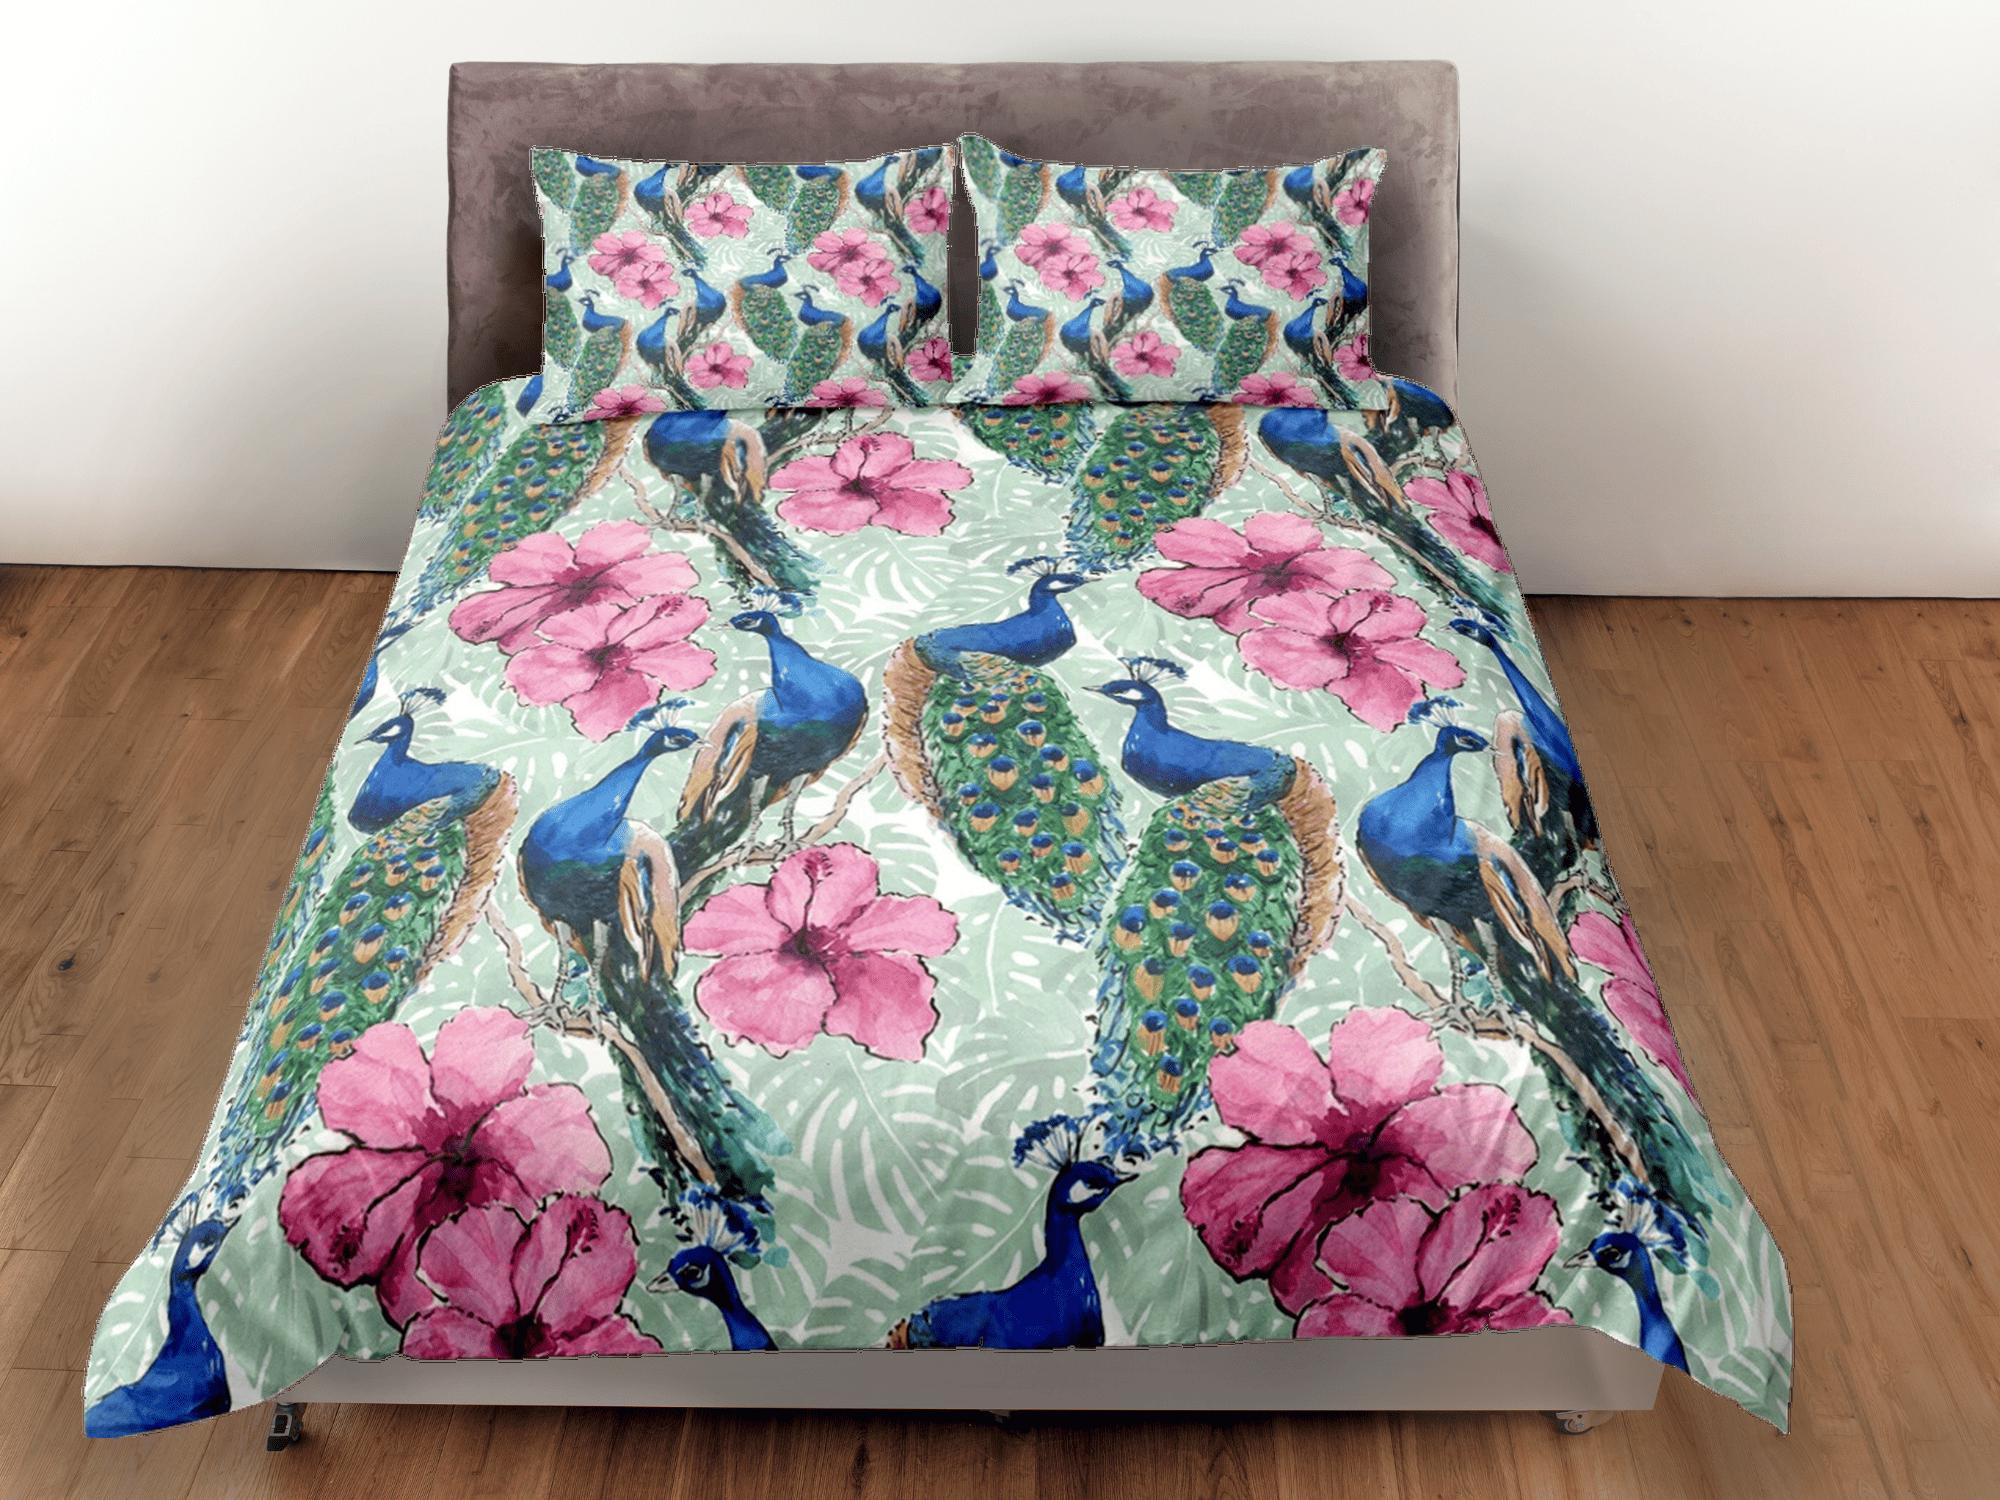 daintyduvet Peacock and pink hibiscus duvet cover colorful bedding, teen girl bedroom, baby girl crib bedding boho maximalist aesthetic bedding